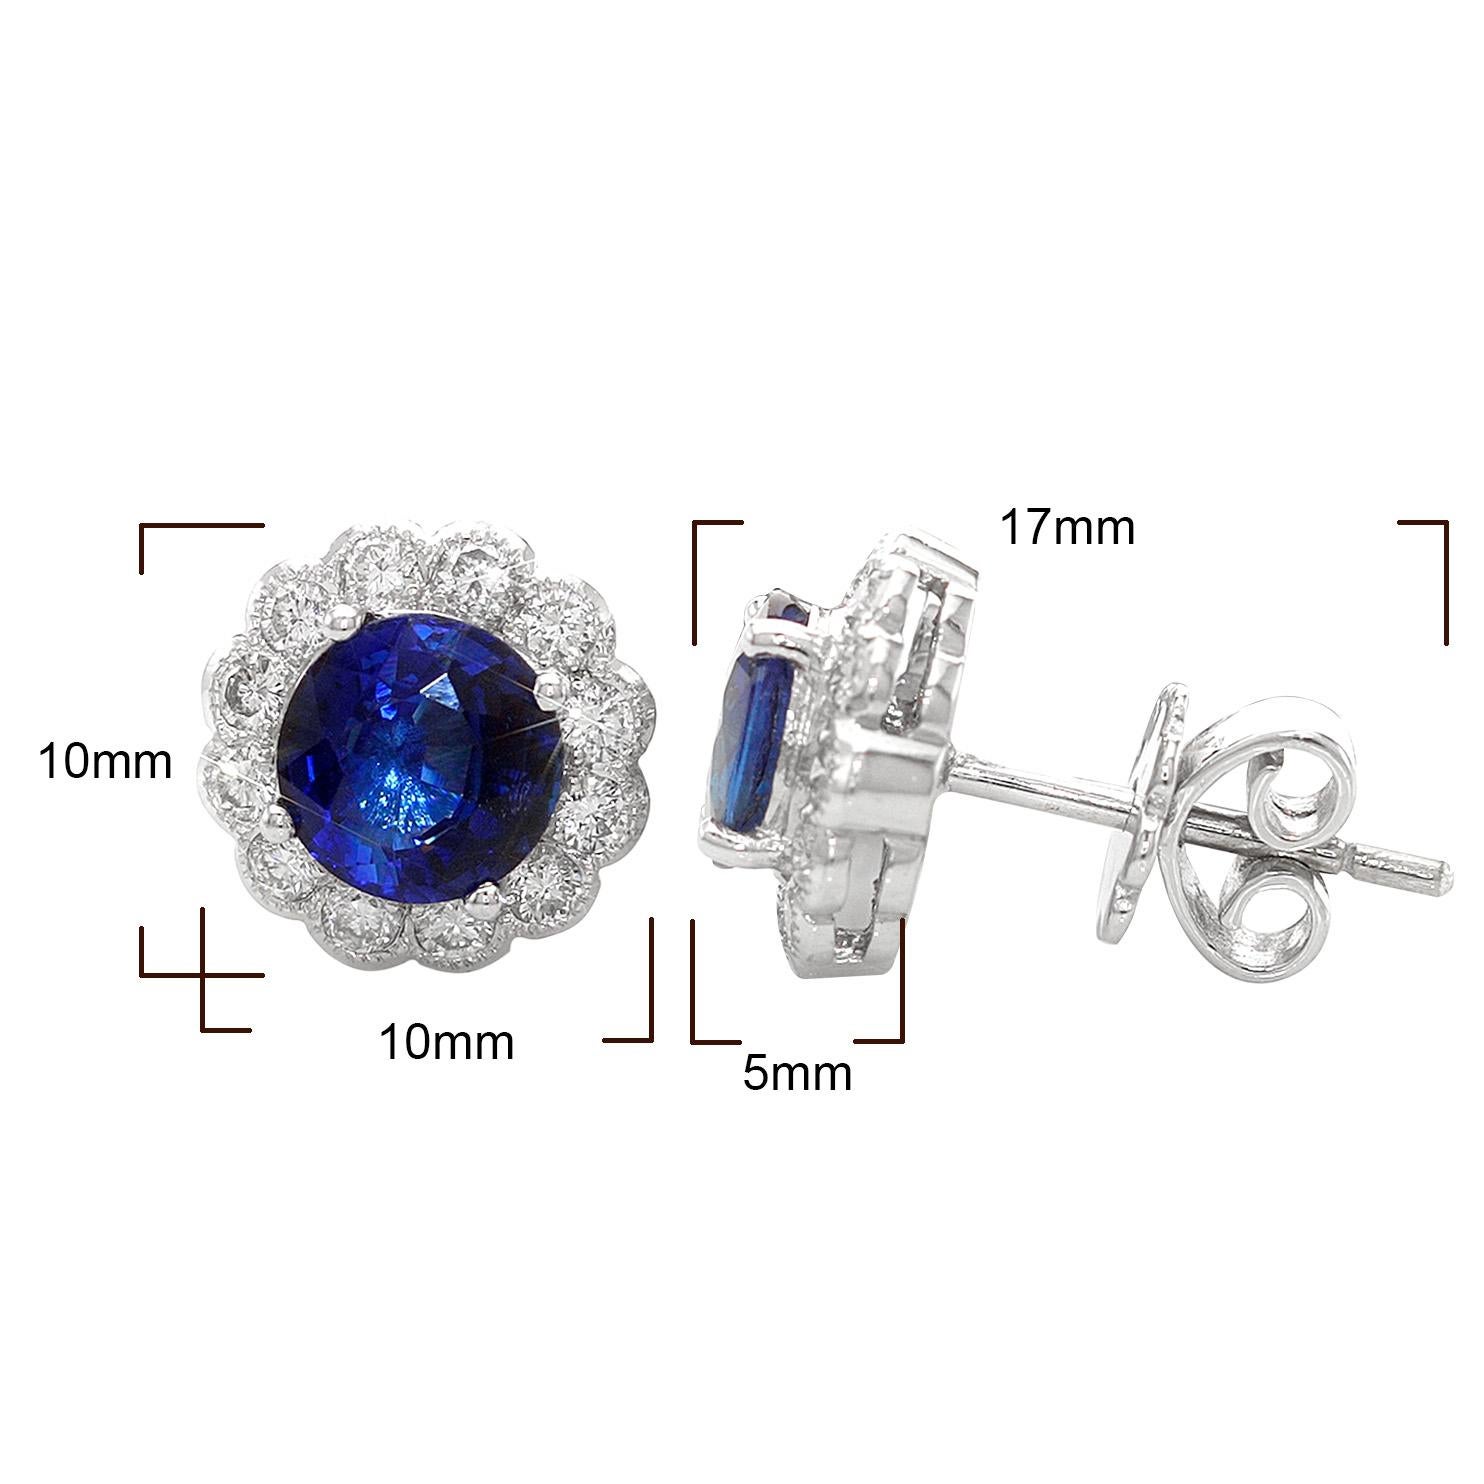 Women's Natural Blue Sapphires 2.42 Carats set in 18K White Gold Earrings with Diamonds For Sale